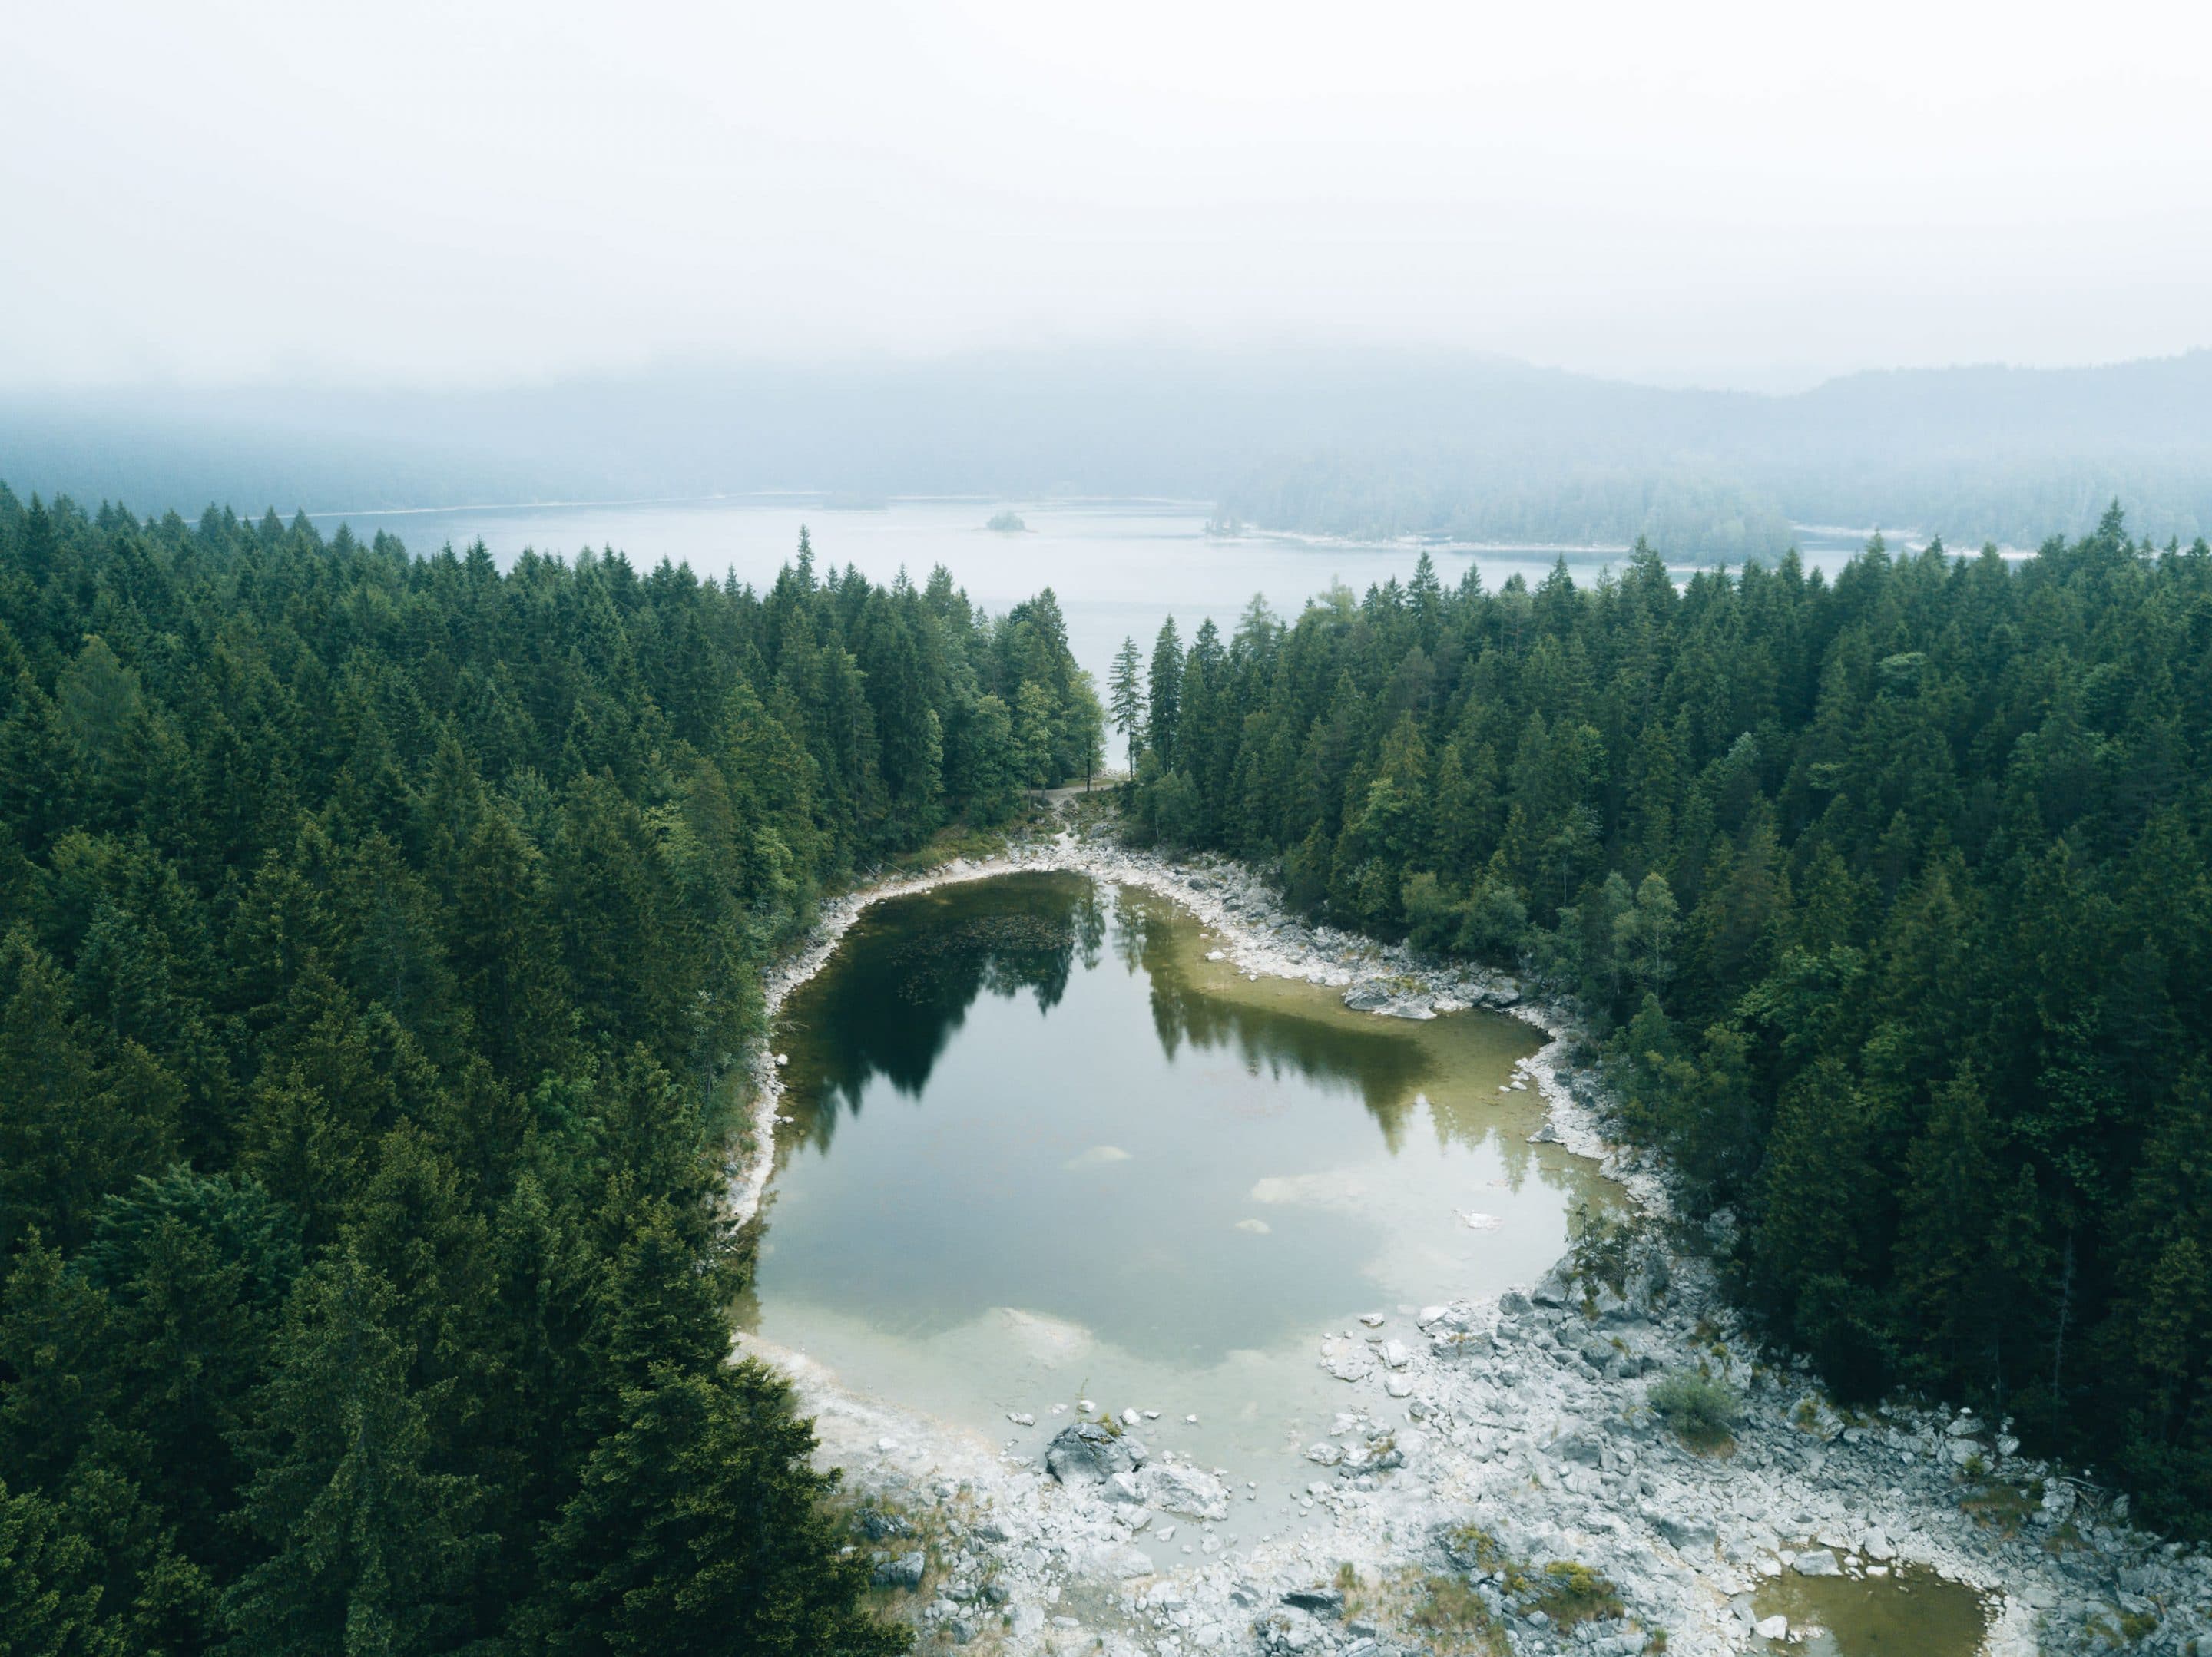 Memories from a moody morning in the forest at the stunning lake Eibsee in southern Germany and its intriguing landscape by photographer Michael Schauer